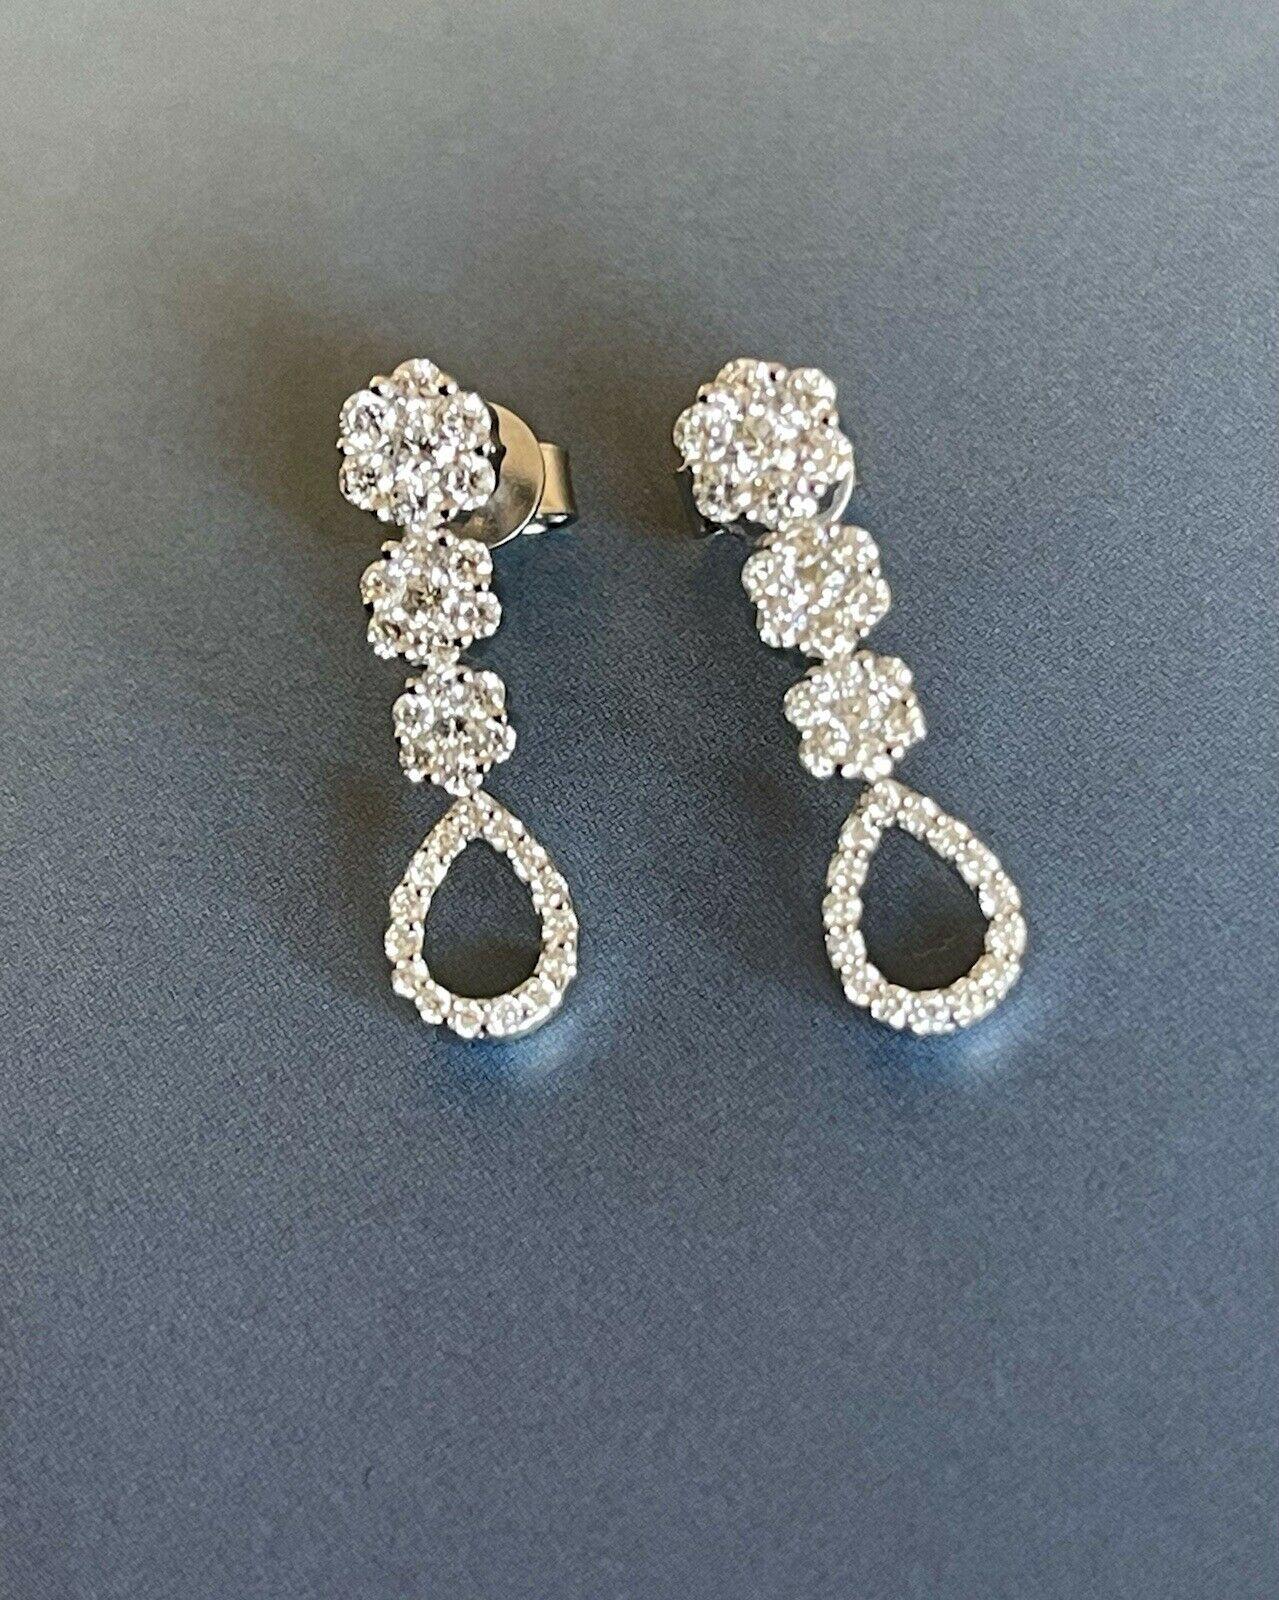 18ct White Gold Diamond Earrings 1.20ct Daisy Drop Cocktail Bridal One Carat For Sale 5